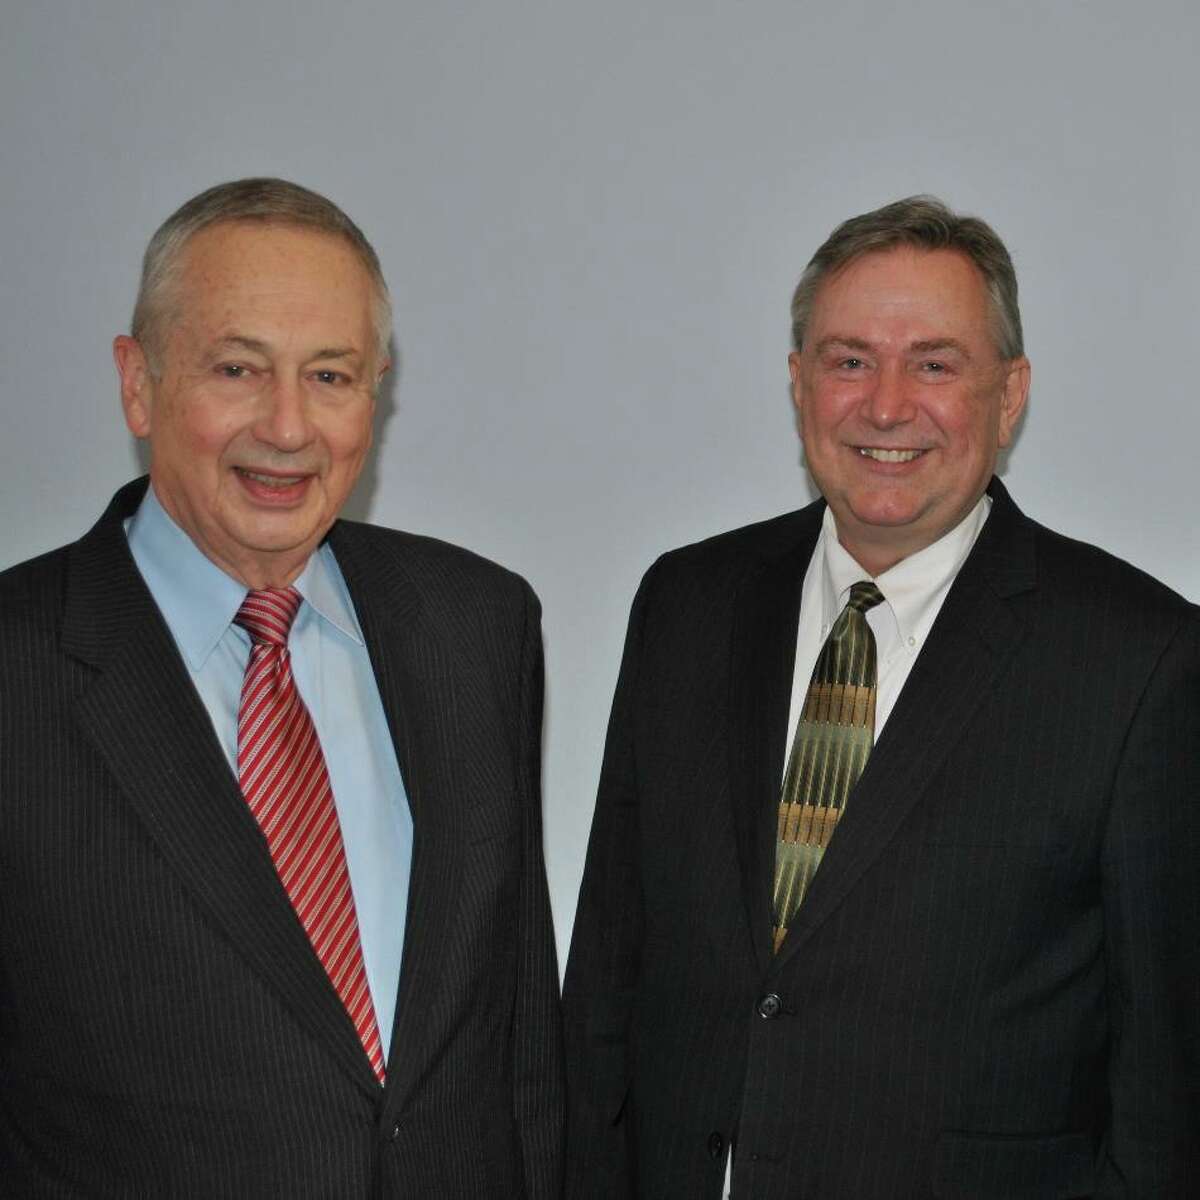 Congressman Steve Stockman and GOA Executive Director Larry Pratt paused for this quick photo on Thursday as Stockman rushed off to file the first pro-gun bill of the 113th Congress. Rep. Stockman introduced H.R.35 to restore safety to America's schools by repealing federal "Gun Free School Zones".